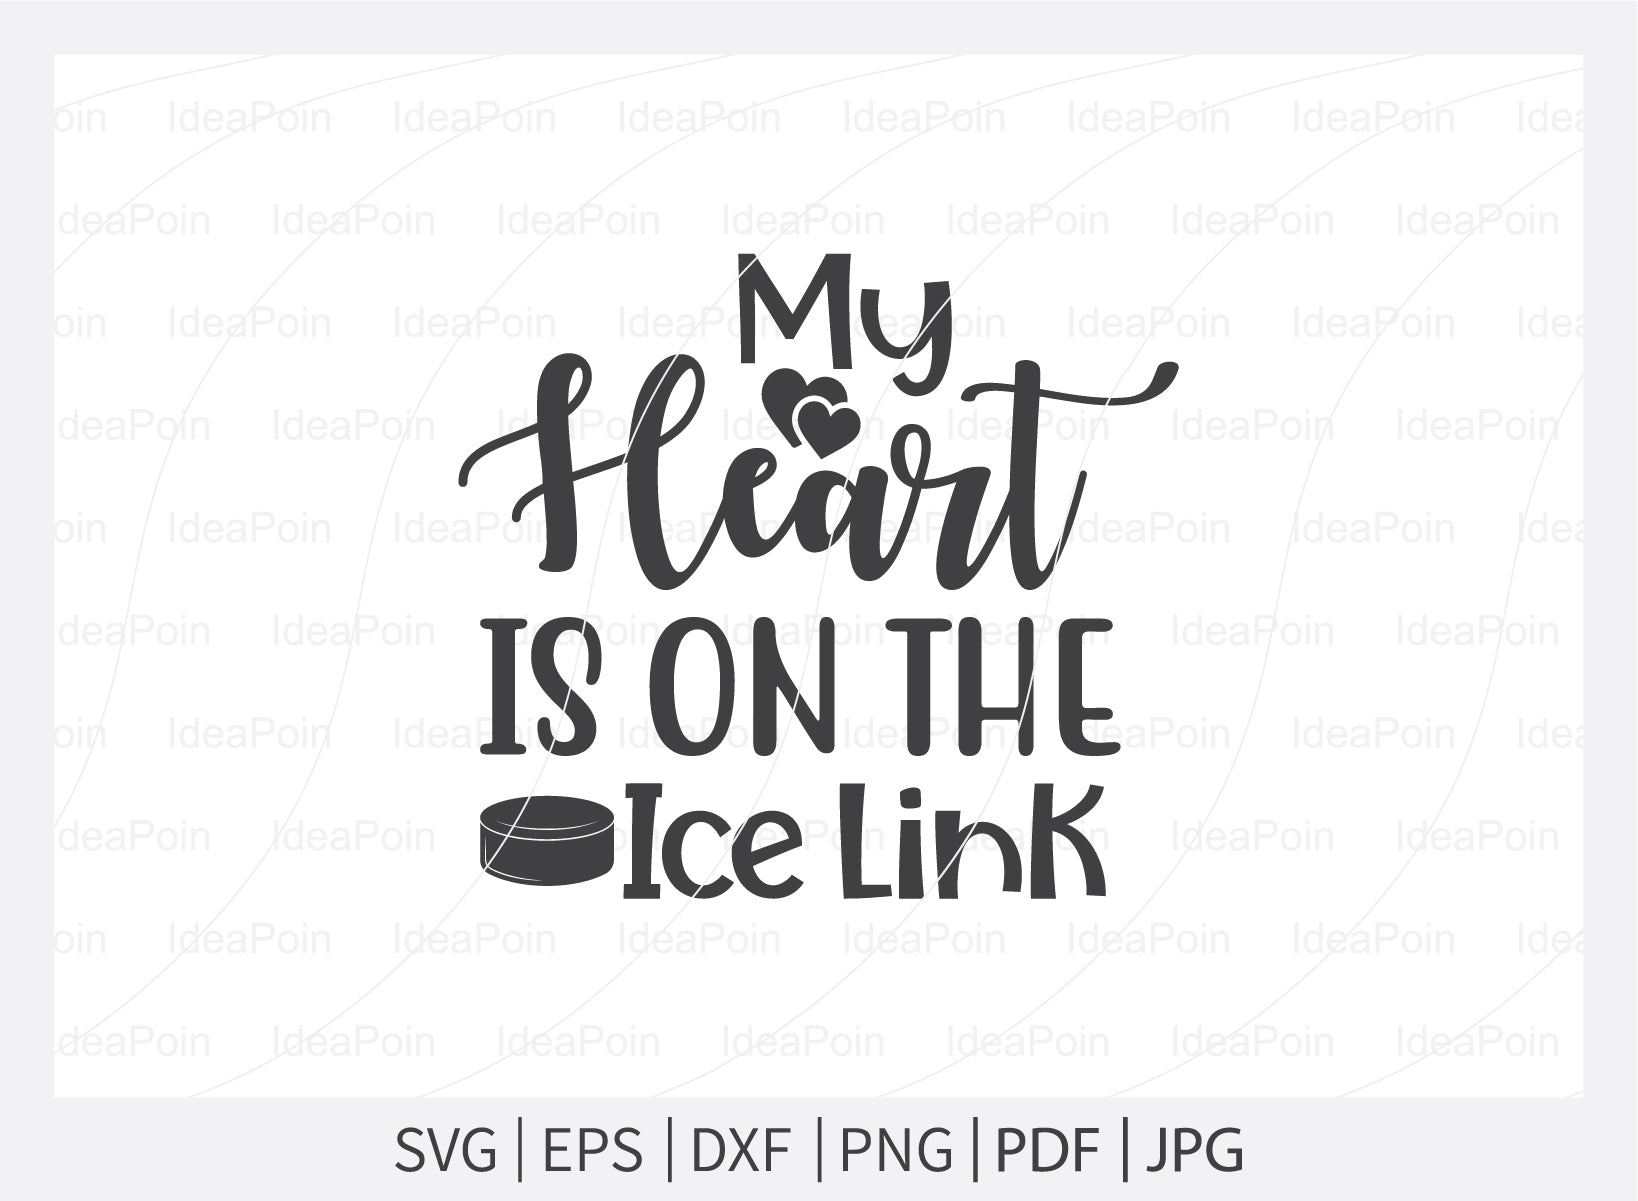 My heart is on the ice link Svg, Ice Hockey SVG, Hockey Quotes Svg, Lets Watch Ice Hockey, Hockey Player, Hockey life clip art, Cut Files for crafters